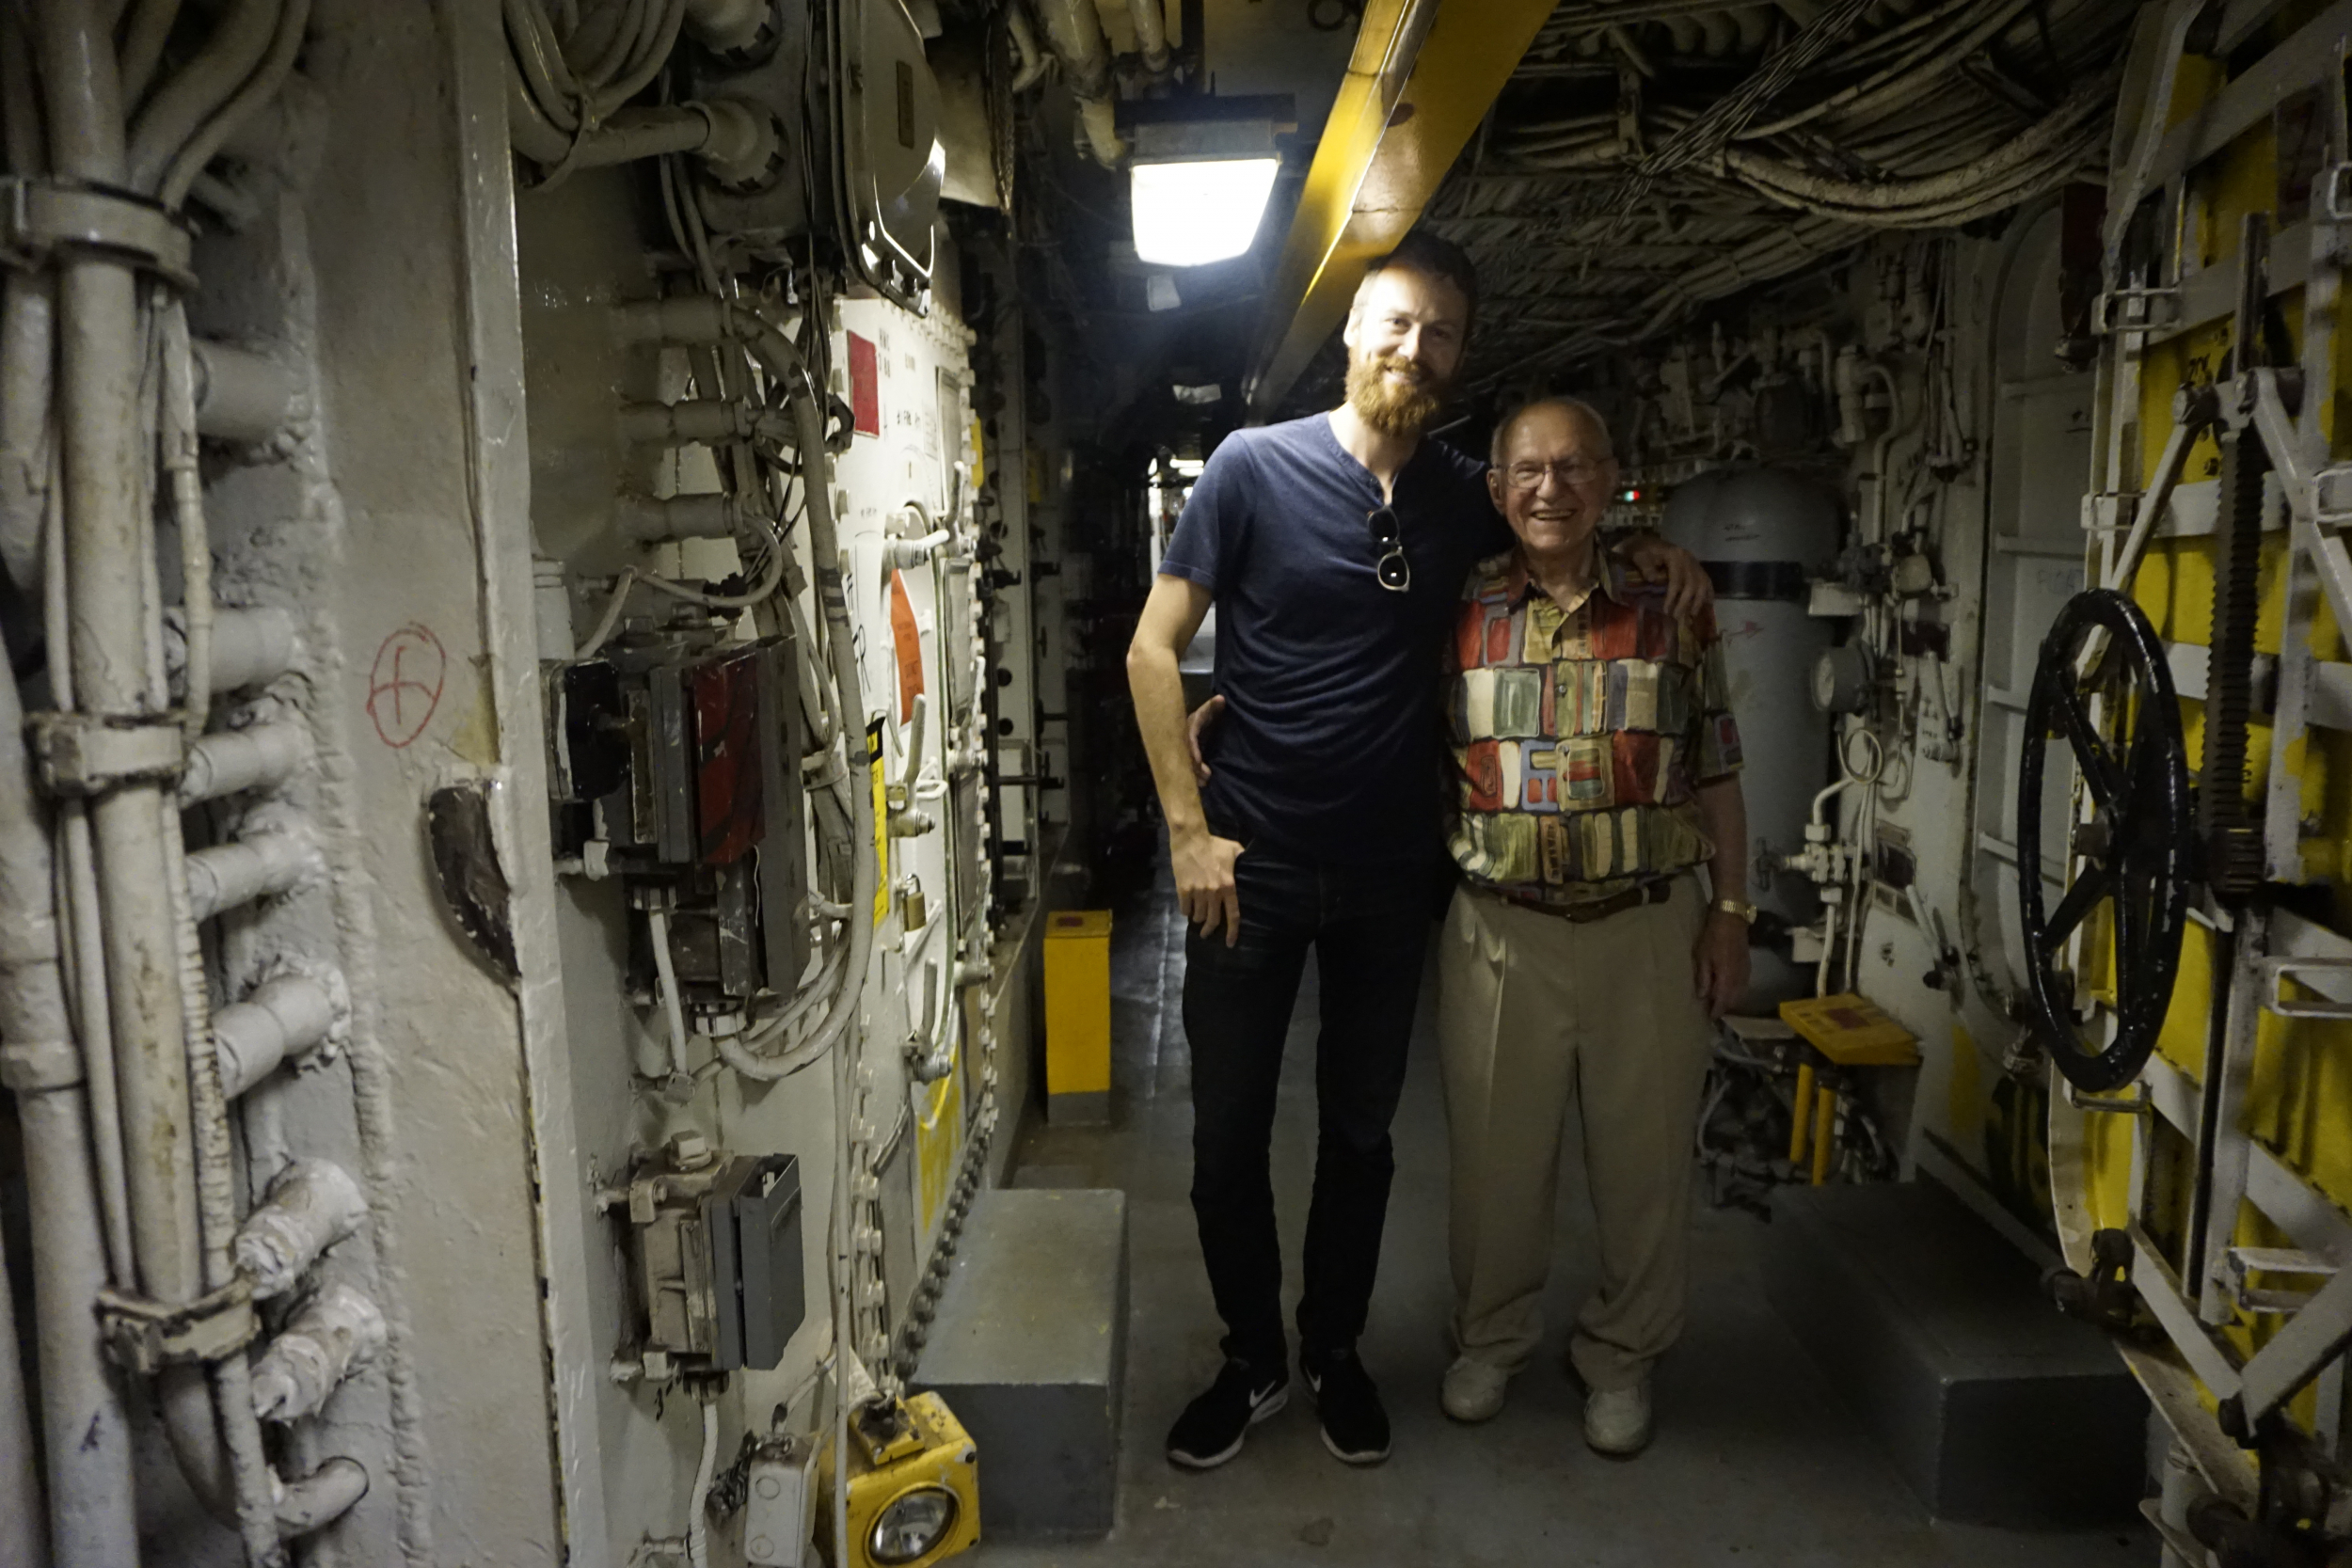 19. Brian and Dad in the bowels of the ship